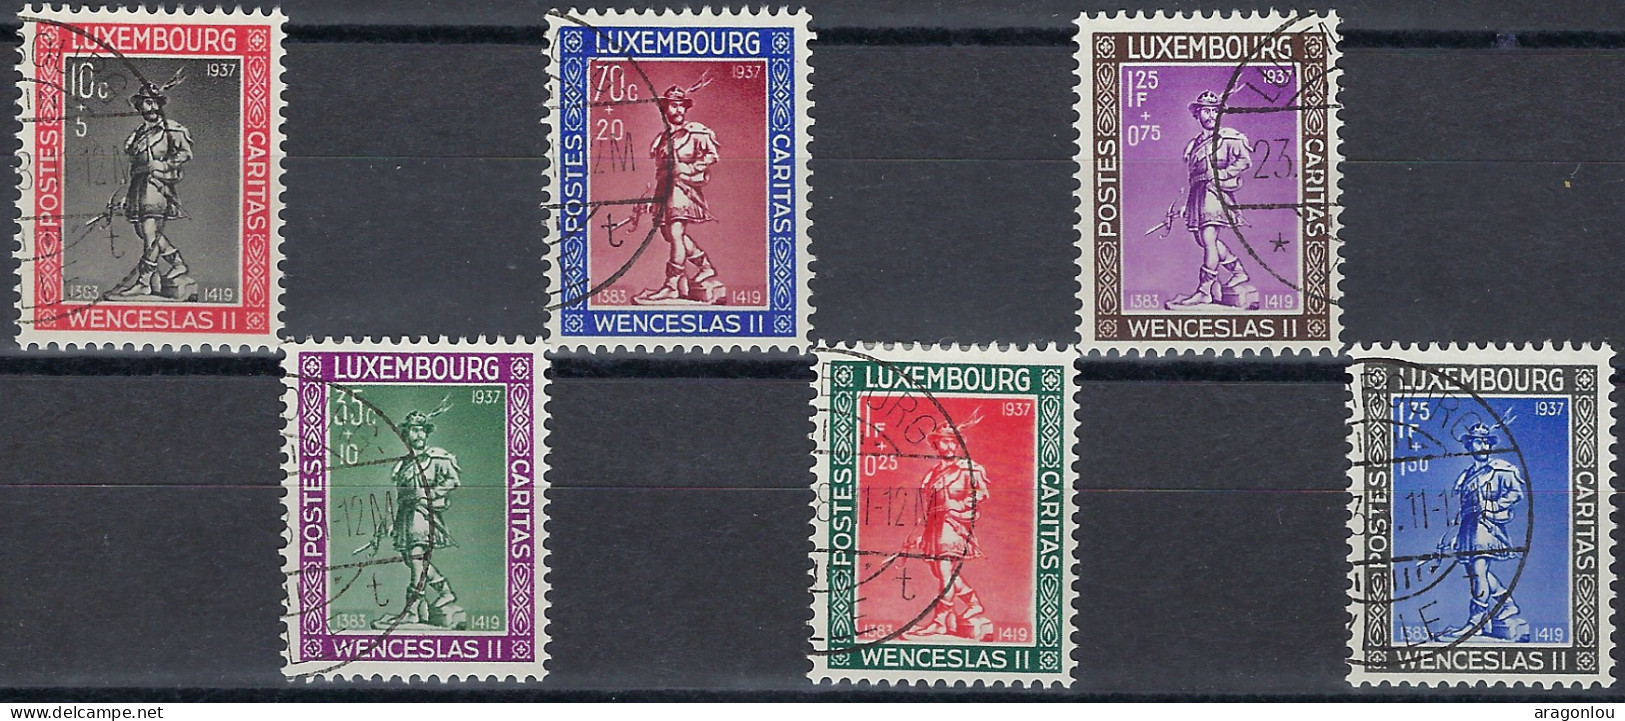 Luxembourg - Luxemburrg - Timbres  1937   Wenzels II      Série   ° - Gebraucht